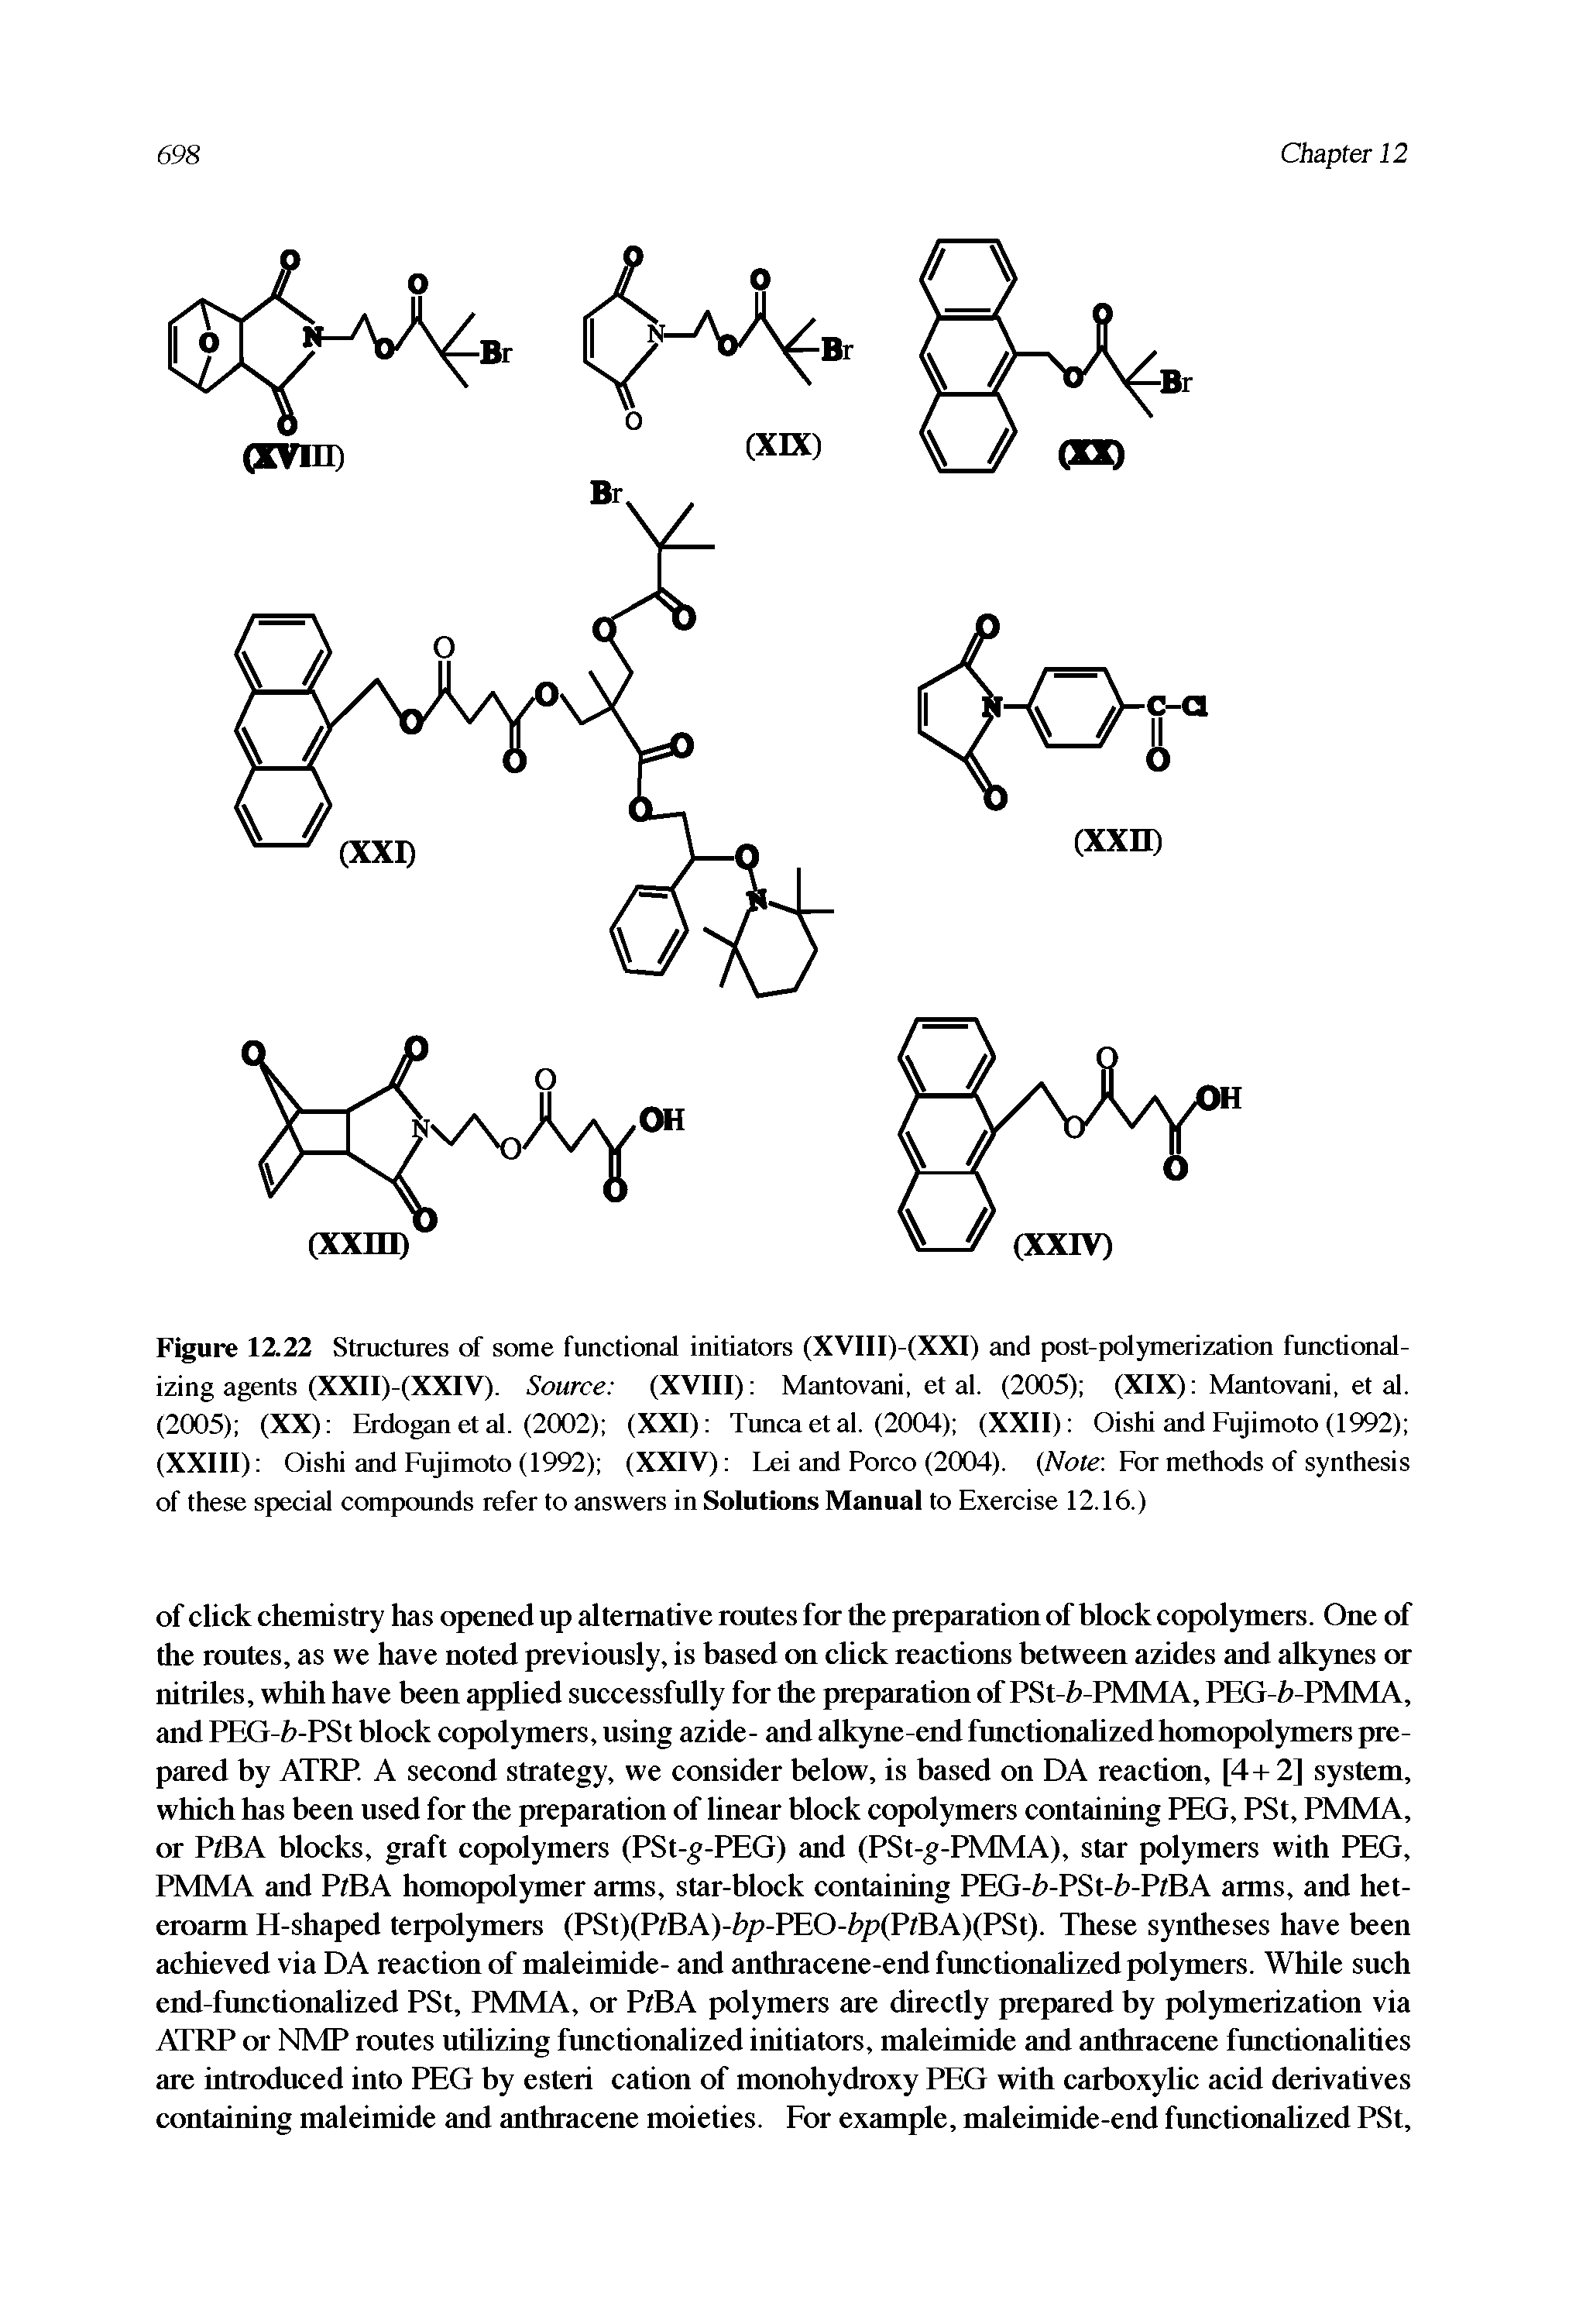 Figure 12.22 Structures of some functional initiators (XVIII)-(XXI) and post-polymerization functionalizing agents (XXII)-(XXIV). Source (XVIII) Mantovani, et al. (2005) (XIX) Mantovani, et al. (2005) (XX) Erdogan et al. (2002) (XXI) Tuncaetal. (2004) (XXII) Oishi and Fujimoto (1992) (XXIII) Oishi and Fujimoto (1992) (XXIV) Lei and Porco (2004). (Atote For methods of synthesis of these special compounds refer to answers in Solutions Manual to Exercise 12.16.)...